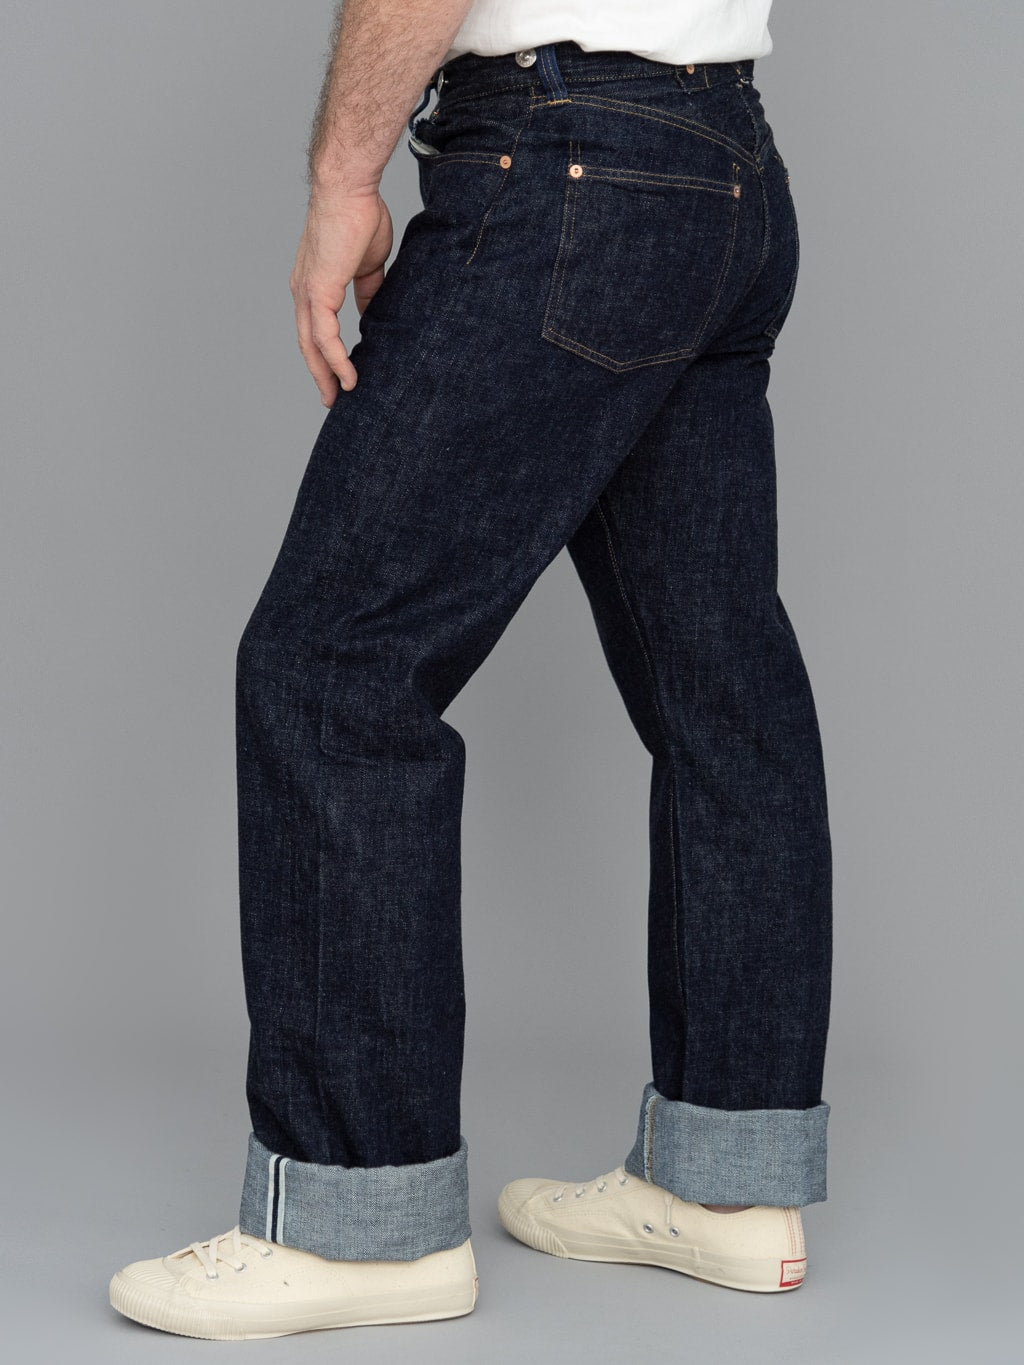 TCB 20s indigo Jeans one wash side fit